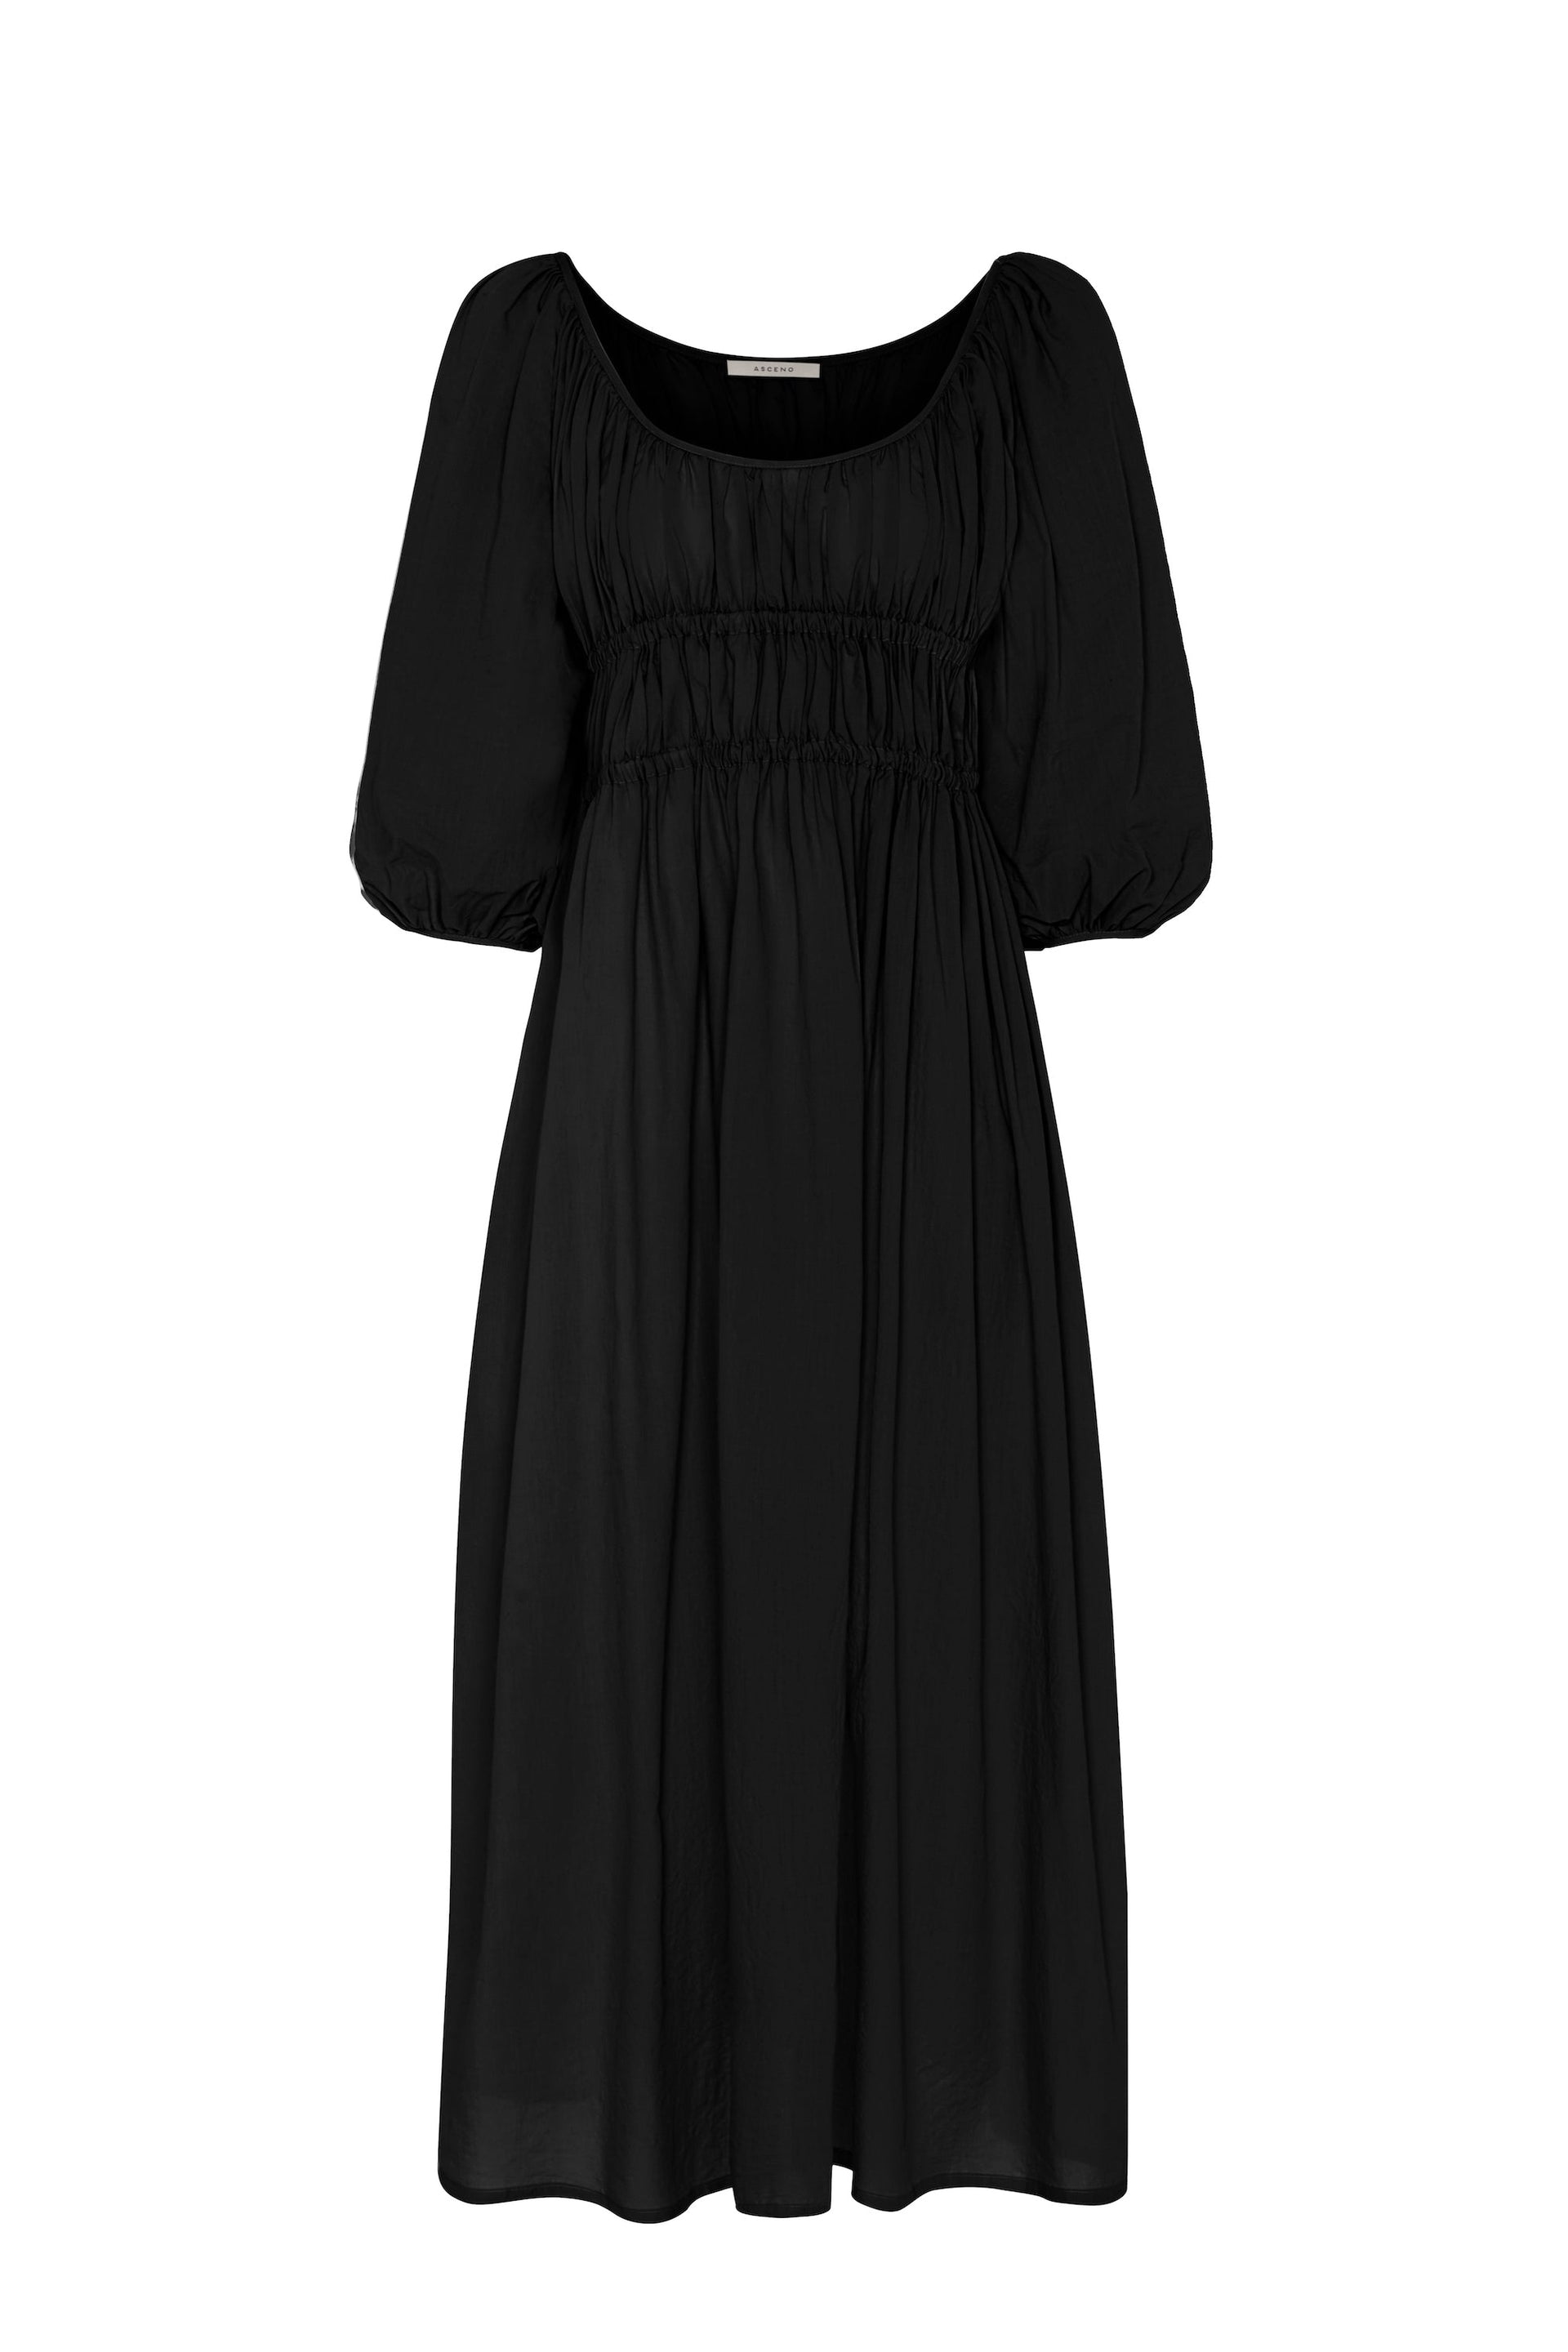 Andros Black Light Weight Cotton Dress